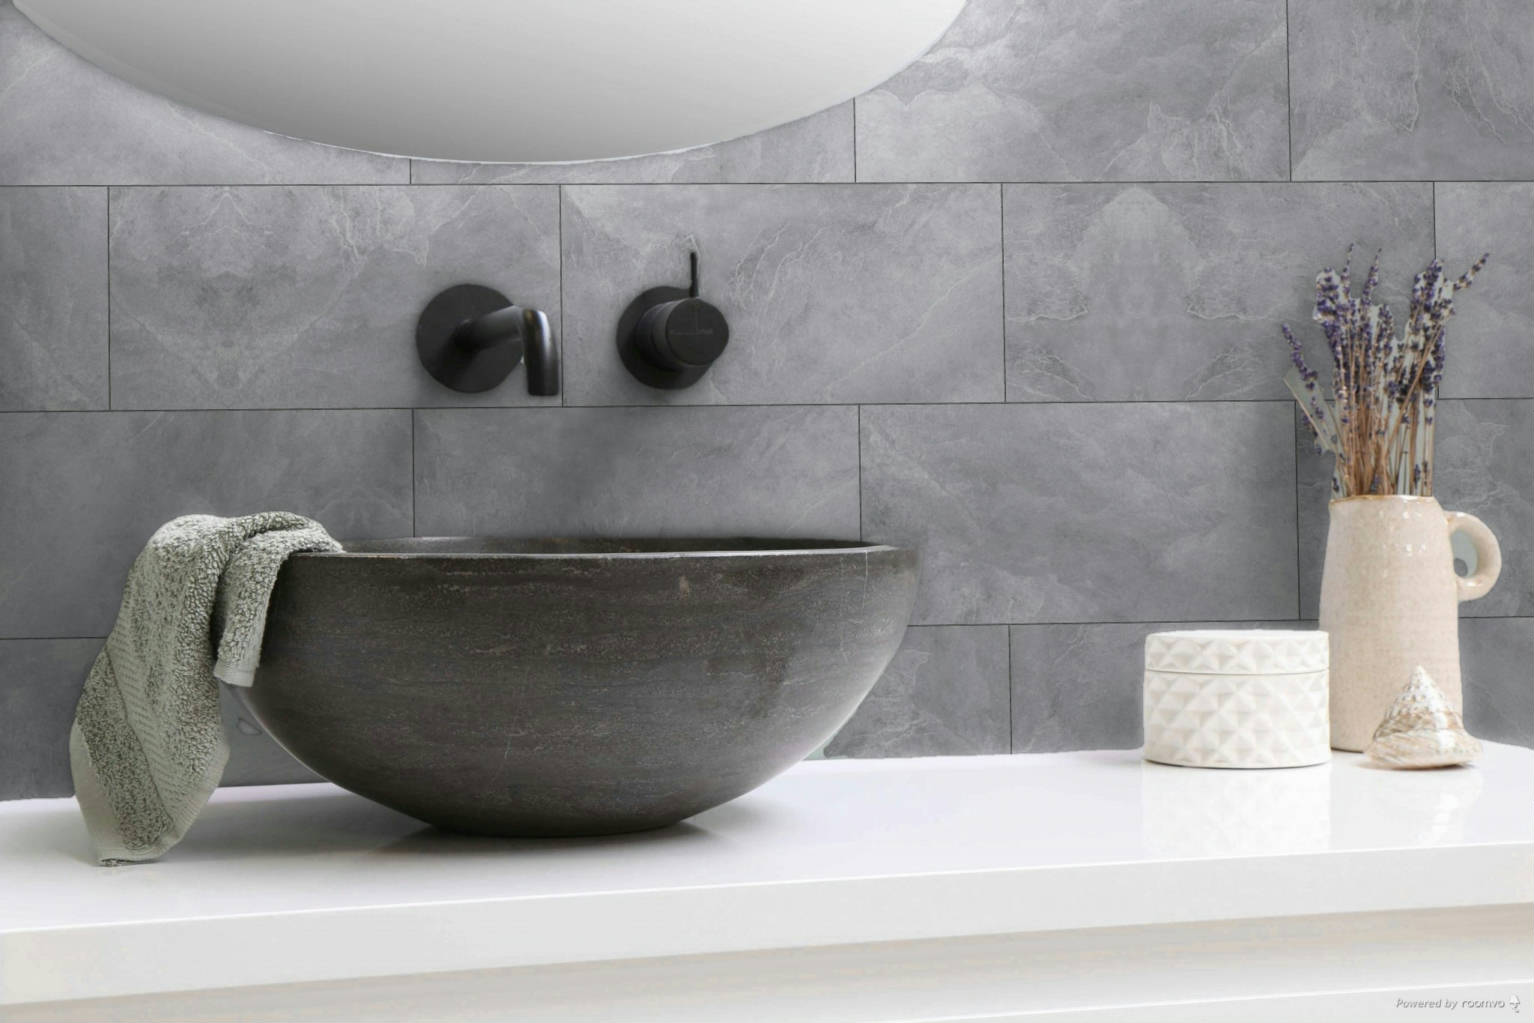 Ravello 12x24” Light Grey | Qualis Ceramica | Luxury Tile and Vinyl at affordable prices